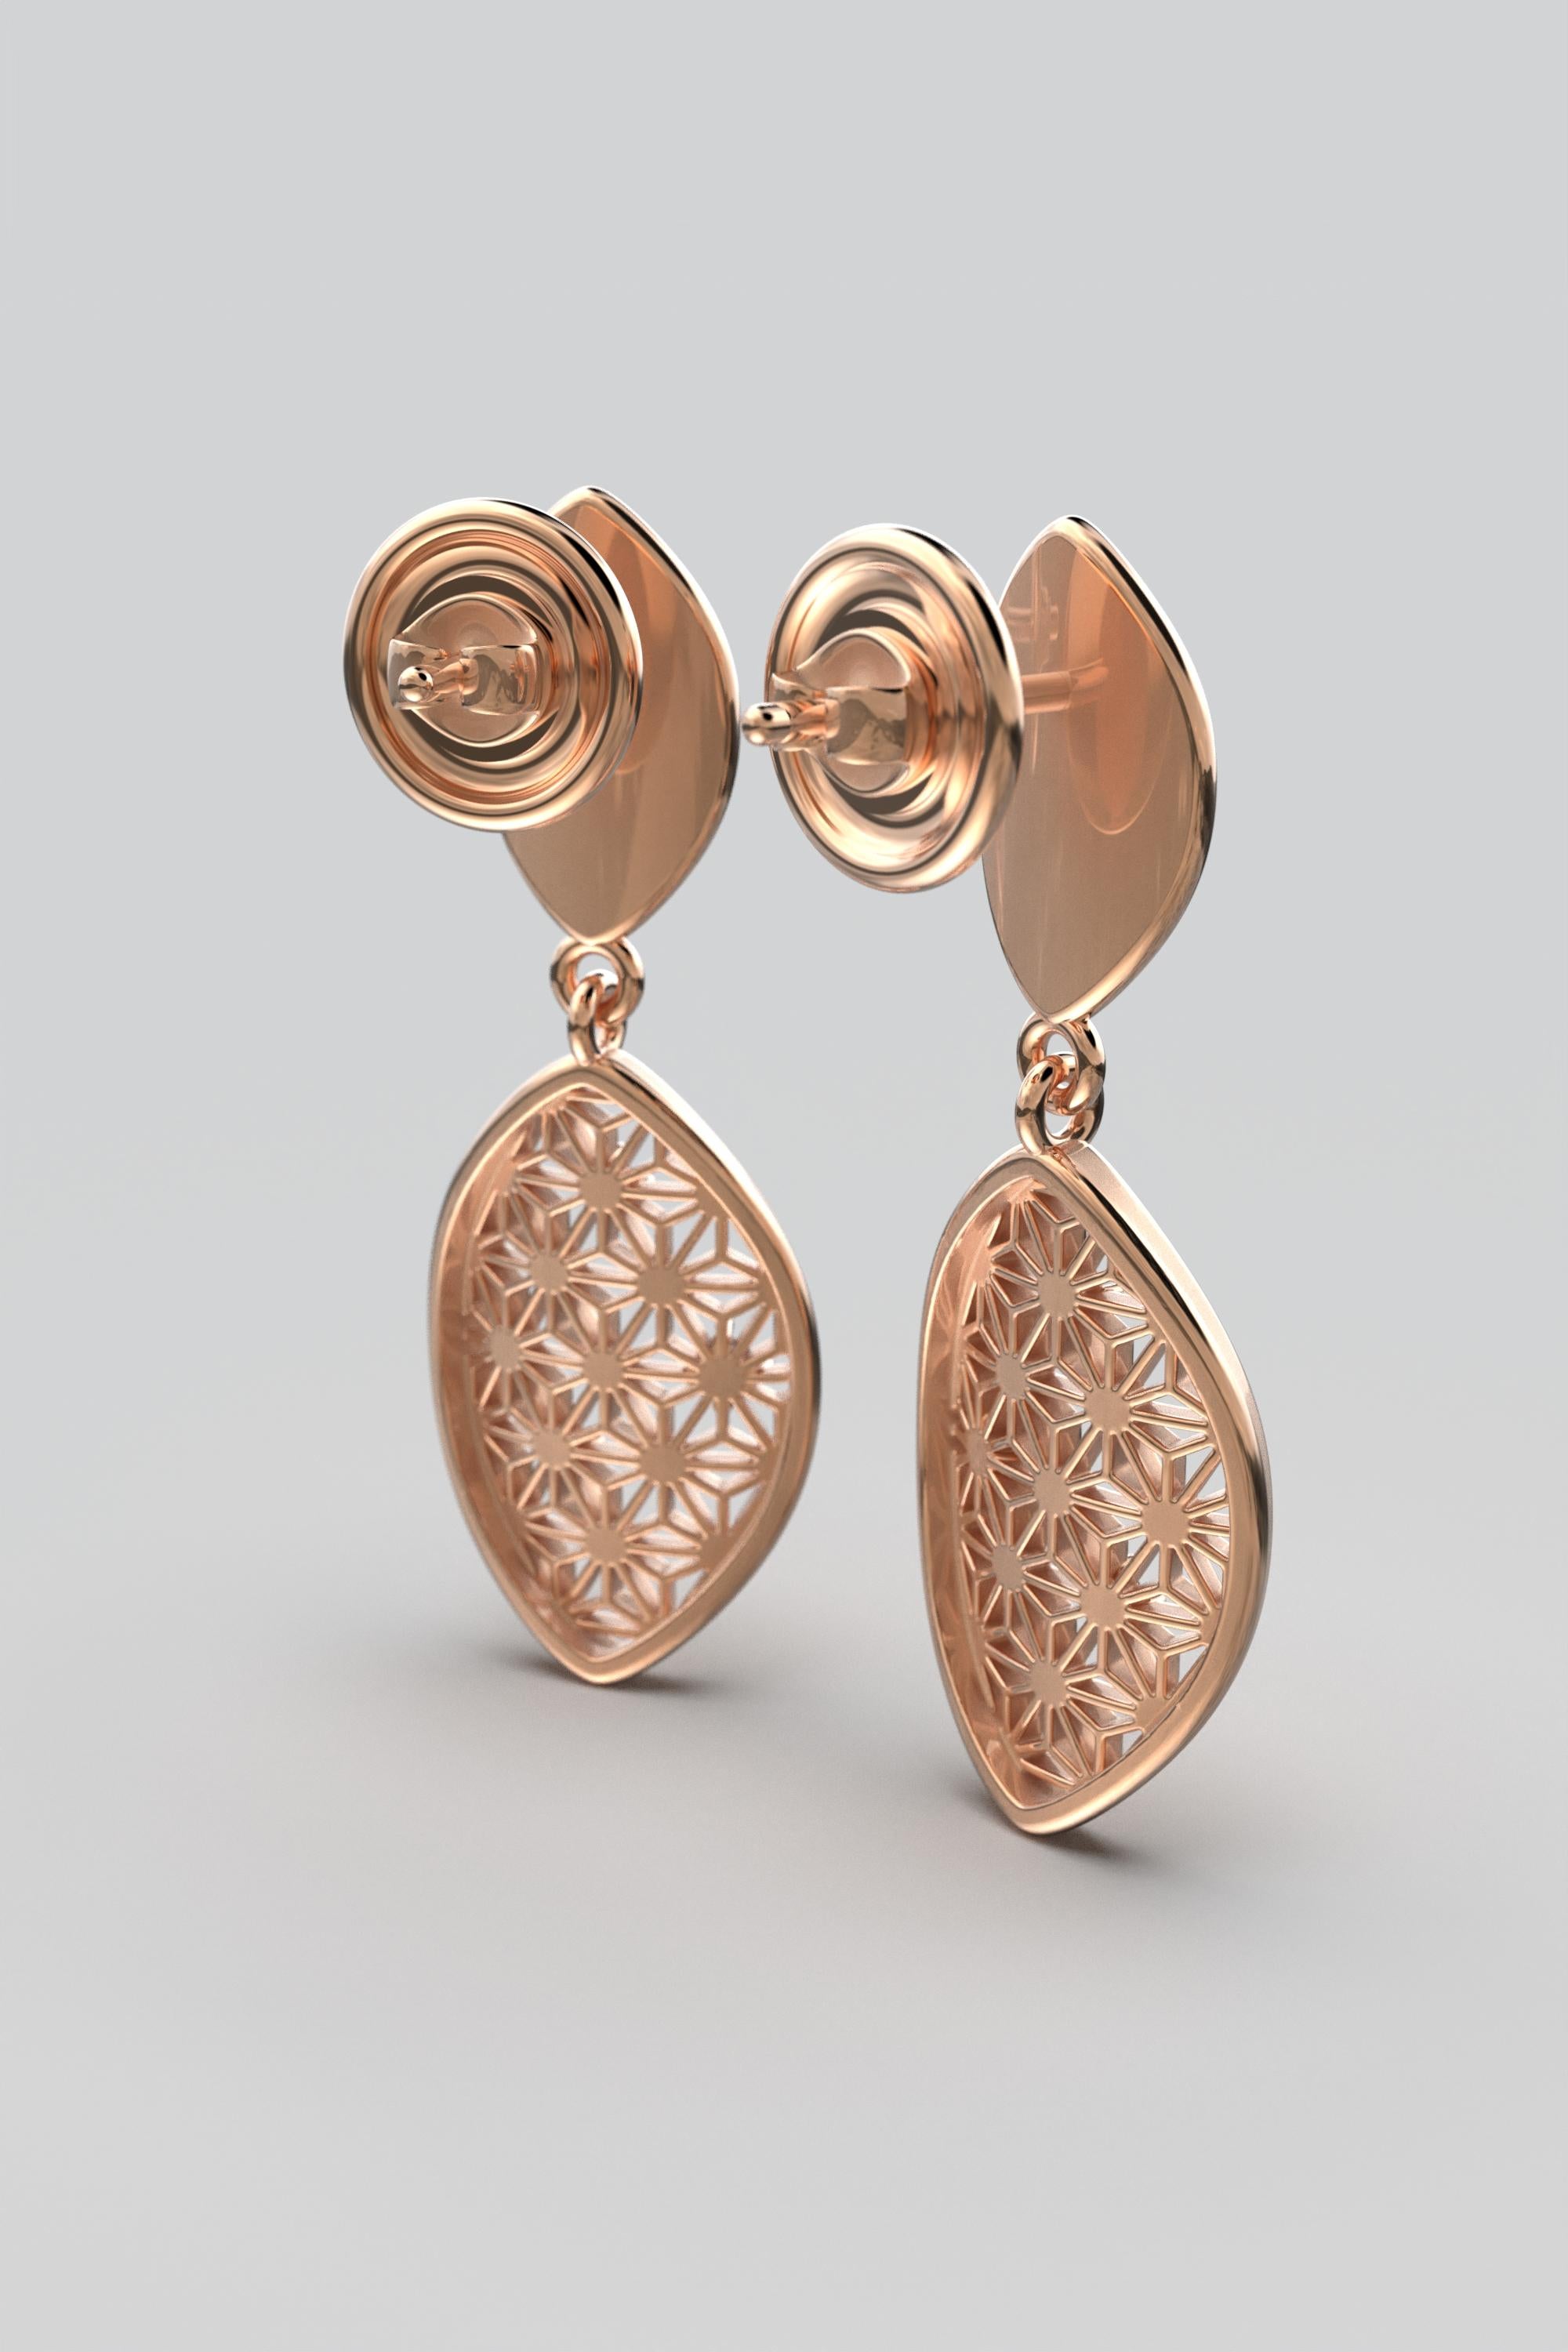 Italian Diamond Earrings in 18k Solid Gold with Japanese Sashiko Pattern For Sale 5